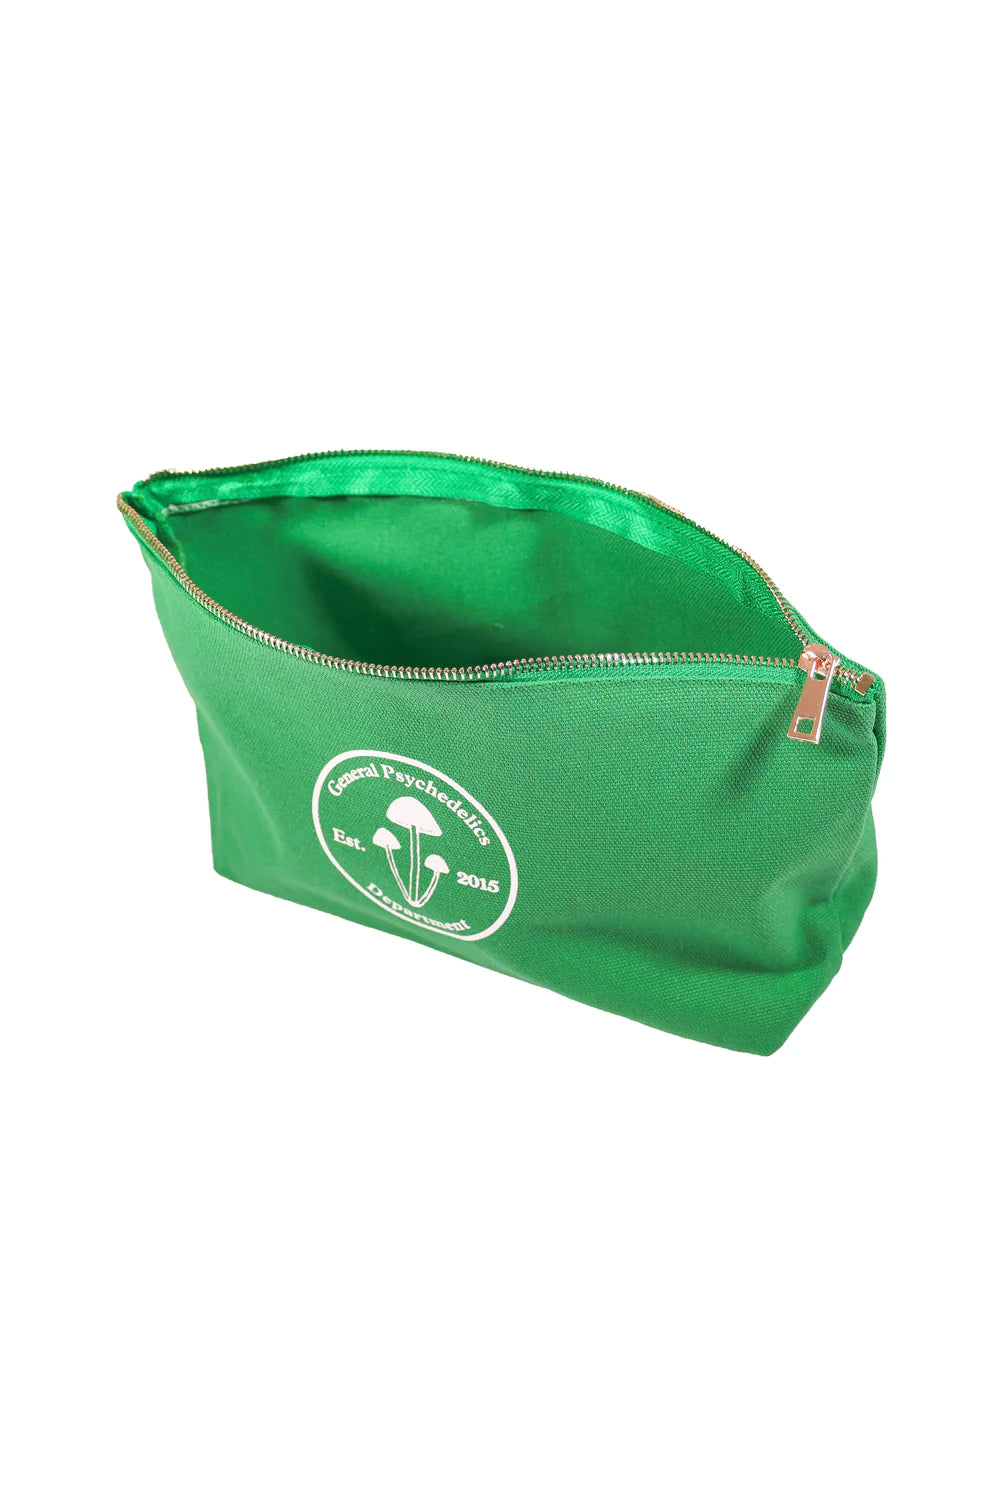 General Psychedelic Department Tool  Bag - Green